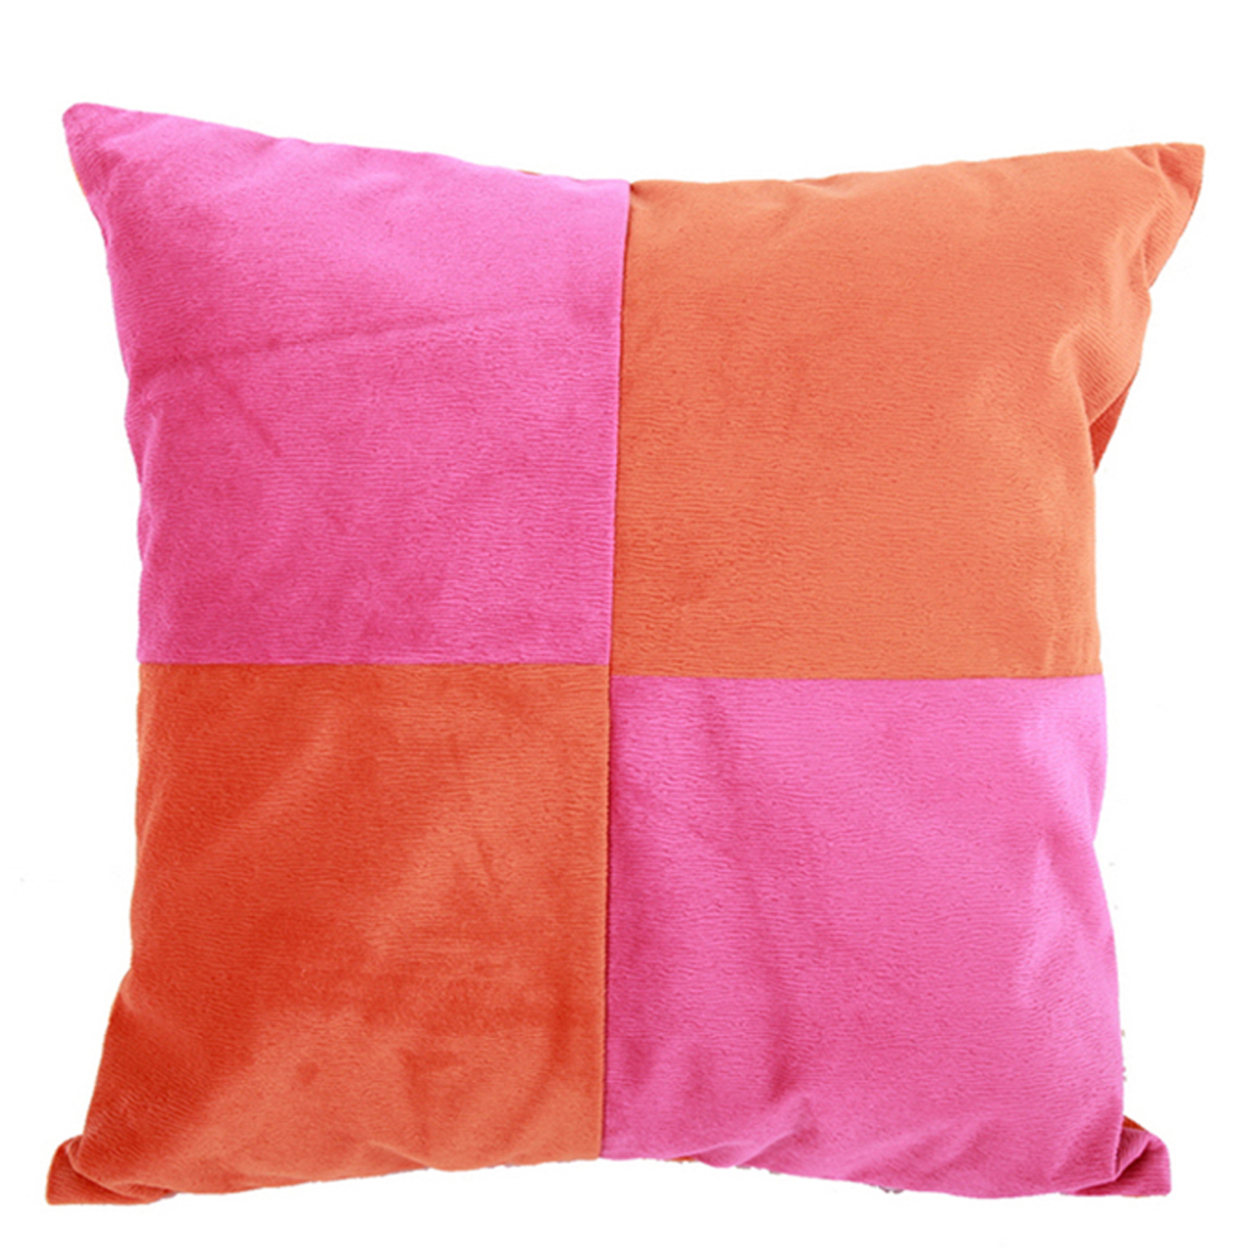 20 X 20 Inch Fabric Pillow With Patch Work Details, Set Of 2, Orange And Pink- Saltoro Sherpi